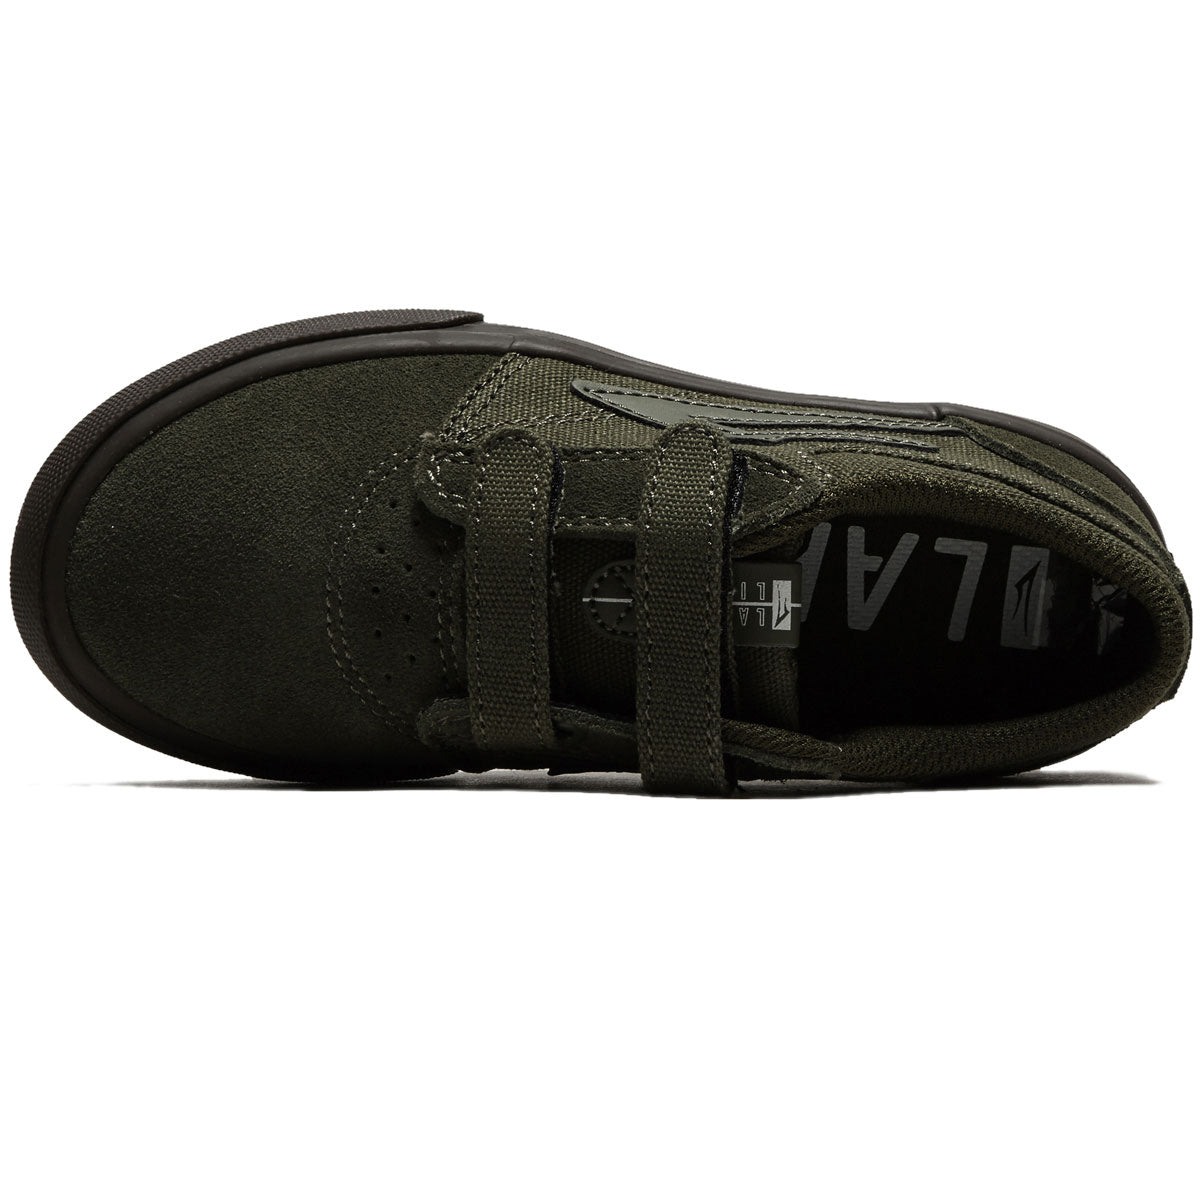 Lakai Youth Griffin Shoes - Olive/Gum Suede image 3